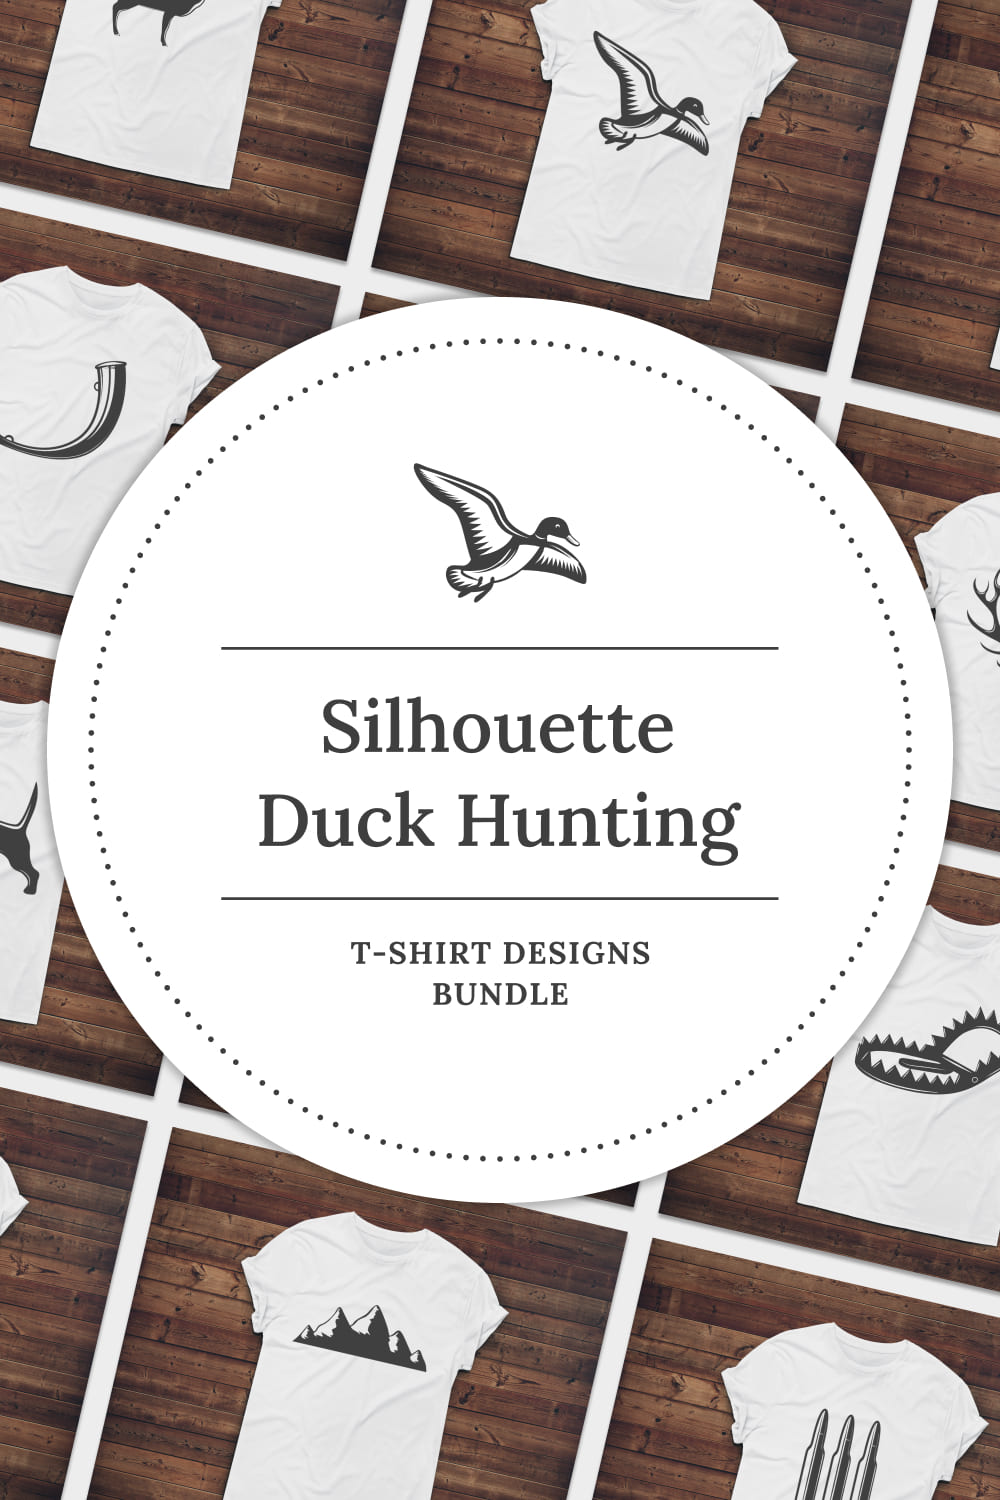 Collection of images of t-shirts with enchanting prints of silhouettes of duck hunting attributes.